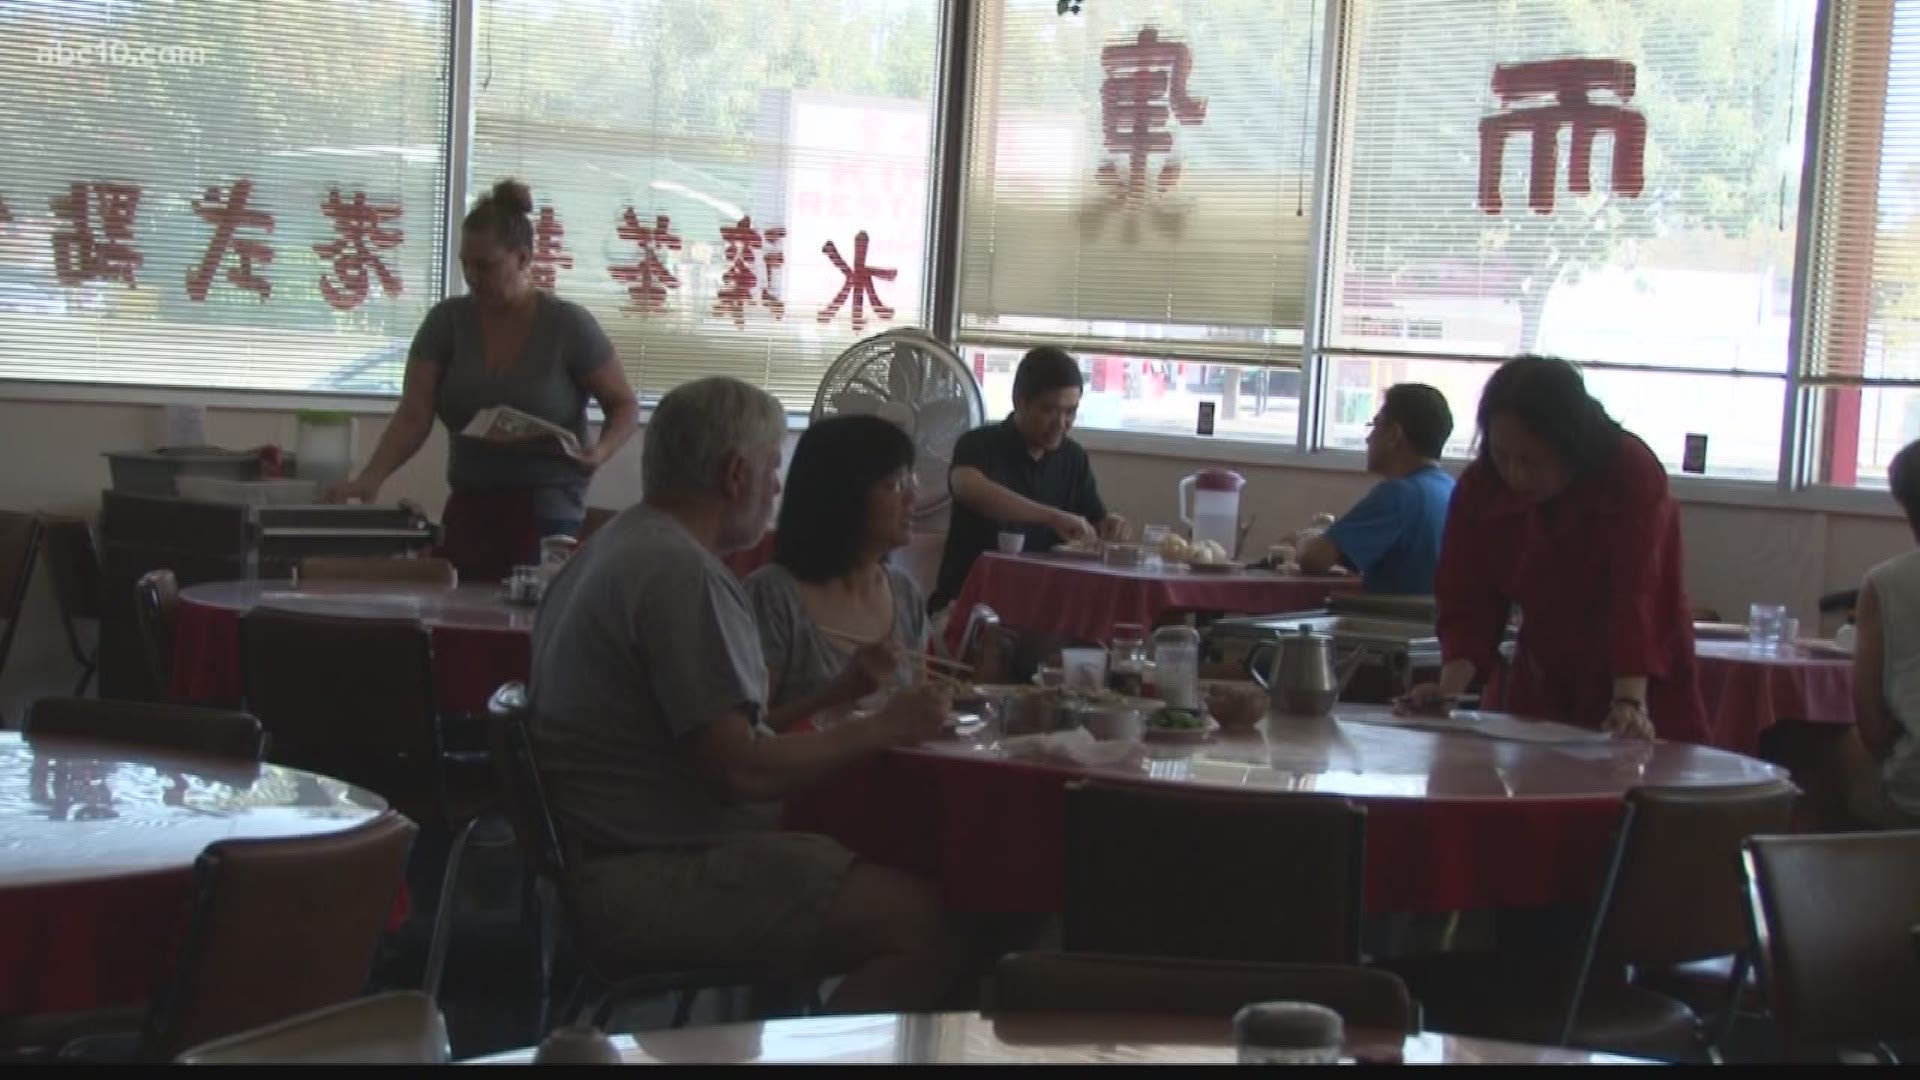 King Restaurant in West Sacramento will serve customers one last time this weekend after nearly 60 years.